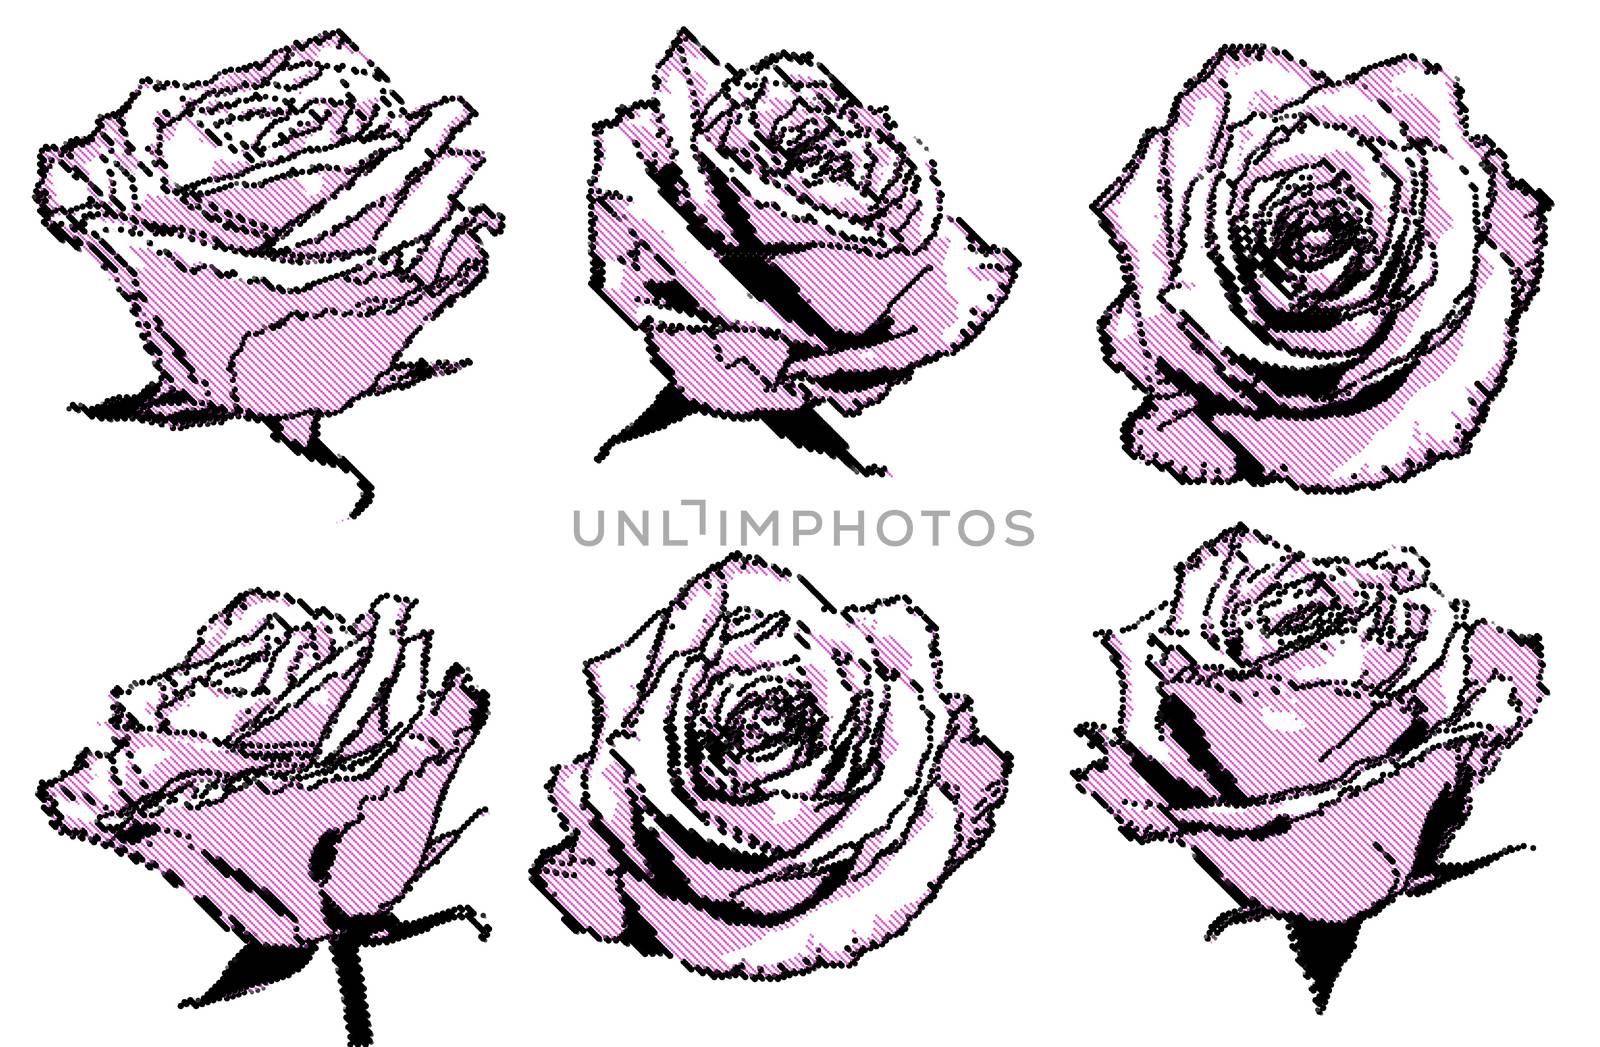 black and pink halftone points roses set